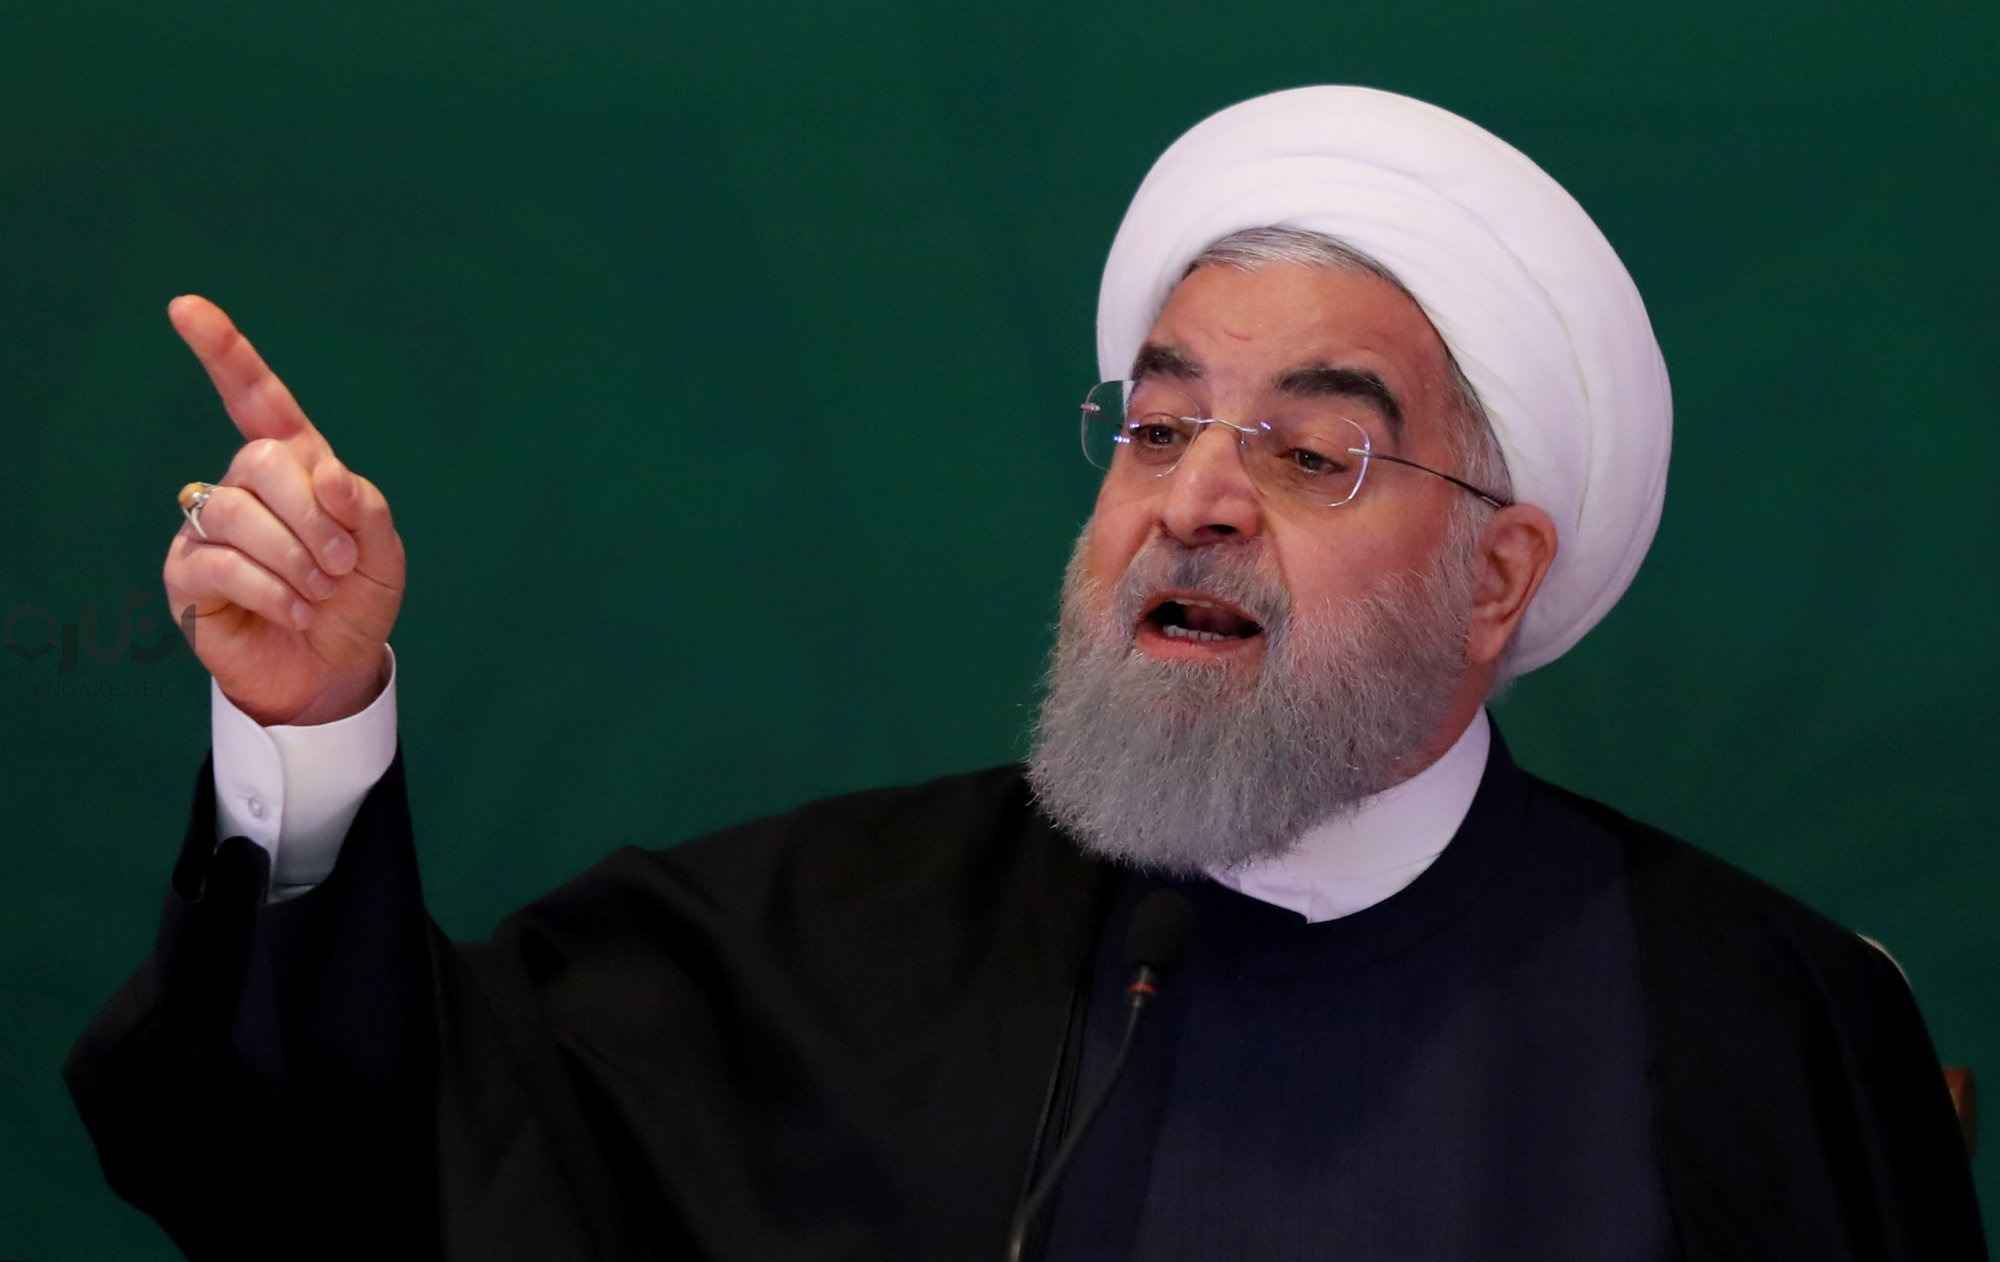 FILE PHOTO: Iranian President Hassan Rouhani speaks during a meeting with Muslim leaders and scholars in Hyderabad, India, February 15, 2018. REUTERS/Danish Siddiqui/File Photo